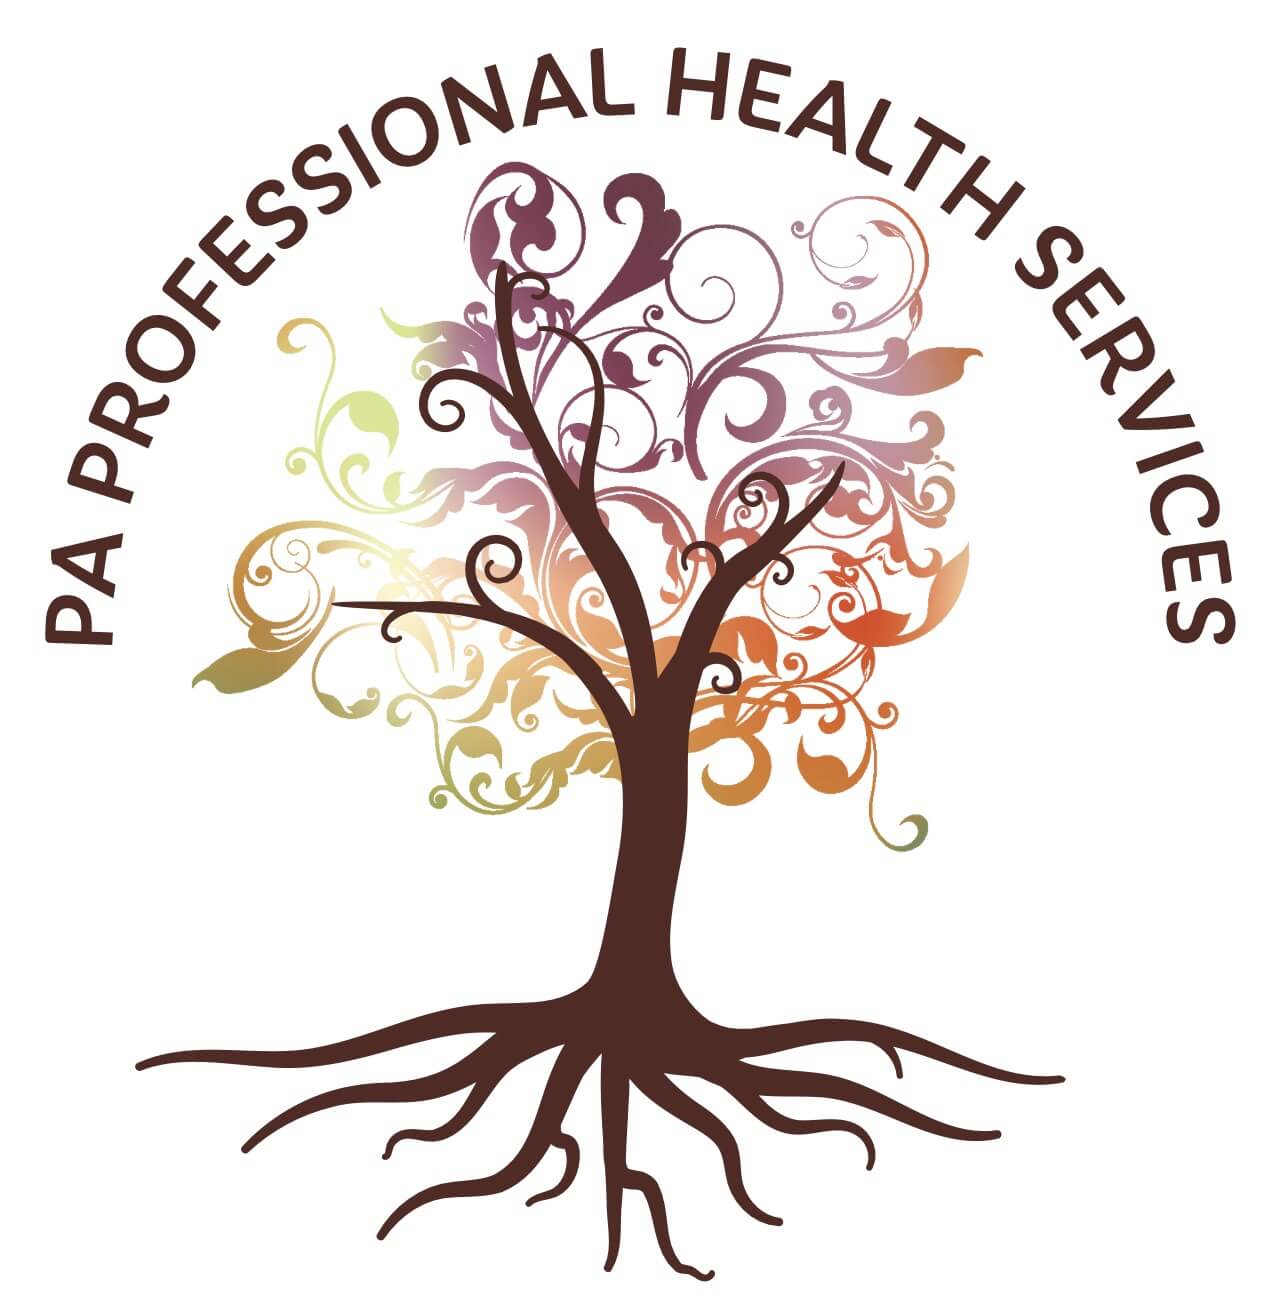 PA Professional Health Services